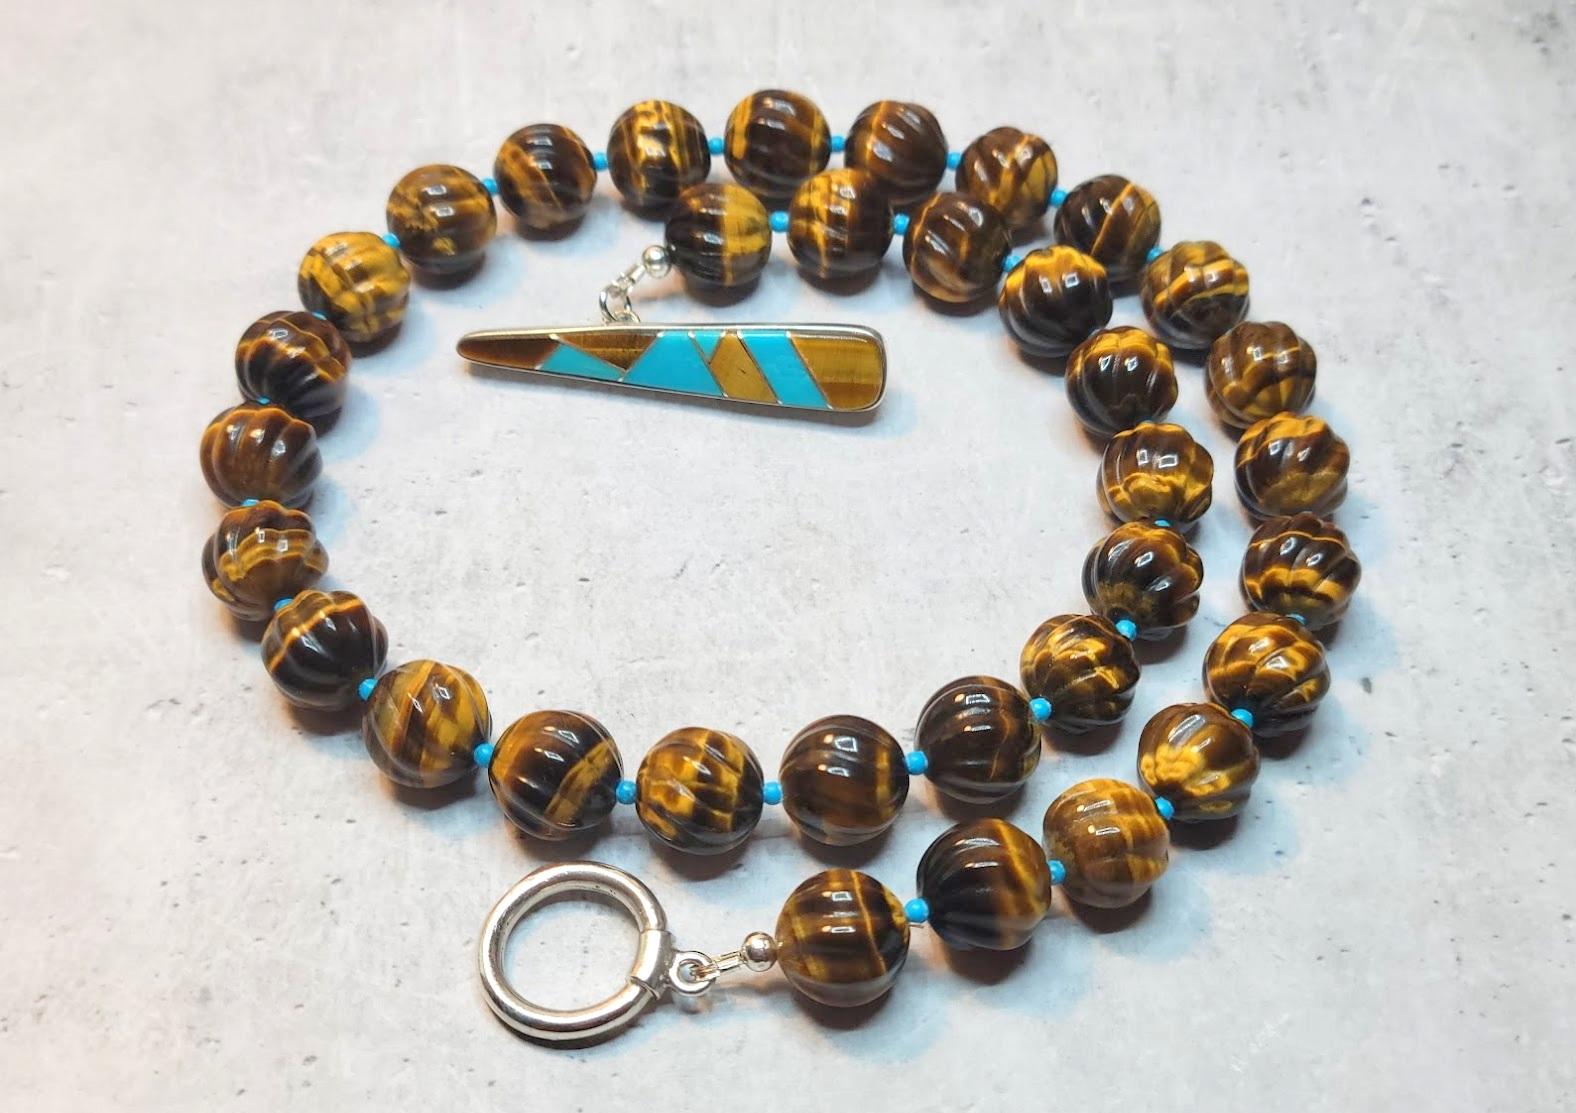 The length of the necklace is 19 inches (48 cm). The size of the 
carved round beads is 12 mm. These are lovely hand-carved tiger eye beads. The carving is a sophisticated swirl pattern. The carving is uniform and very nicely done.
The tones of the